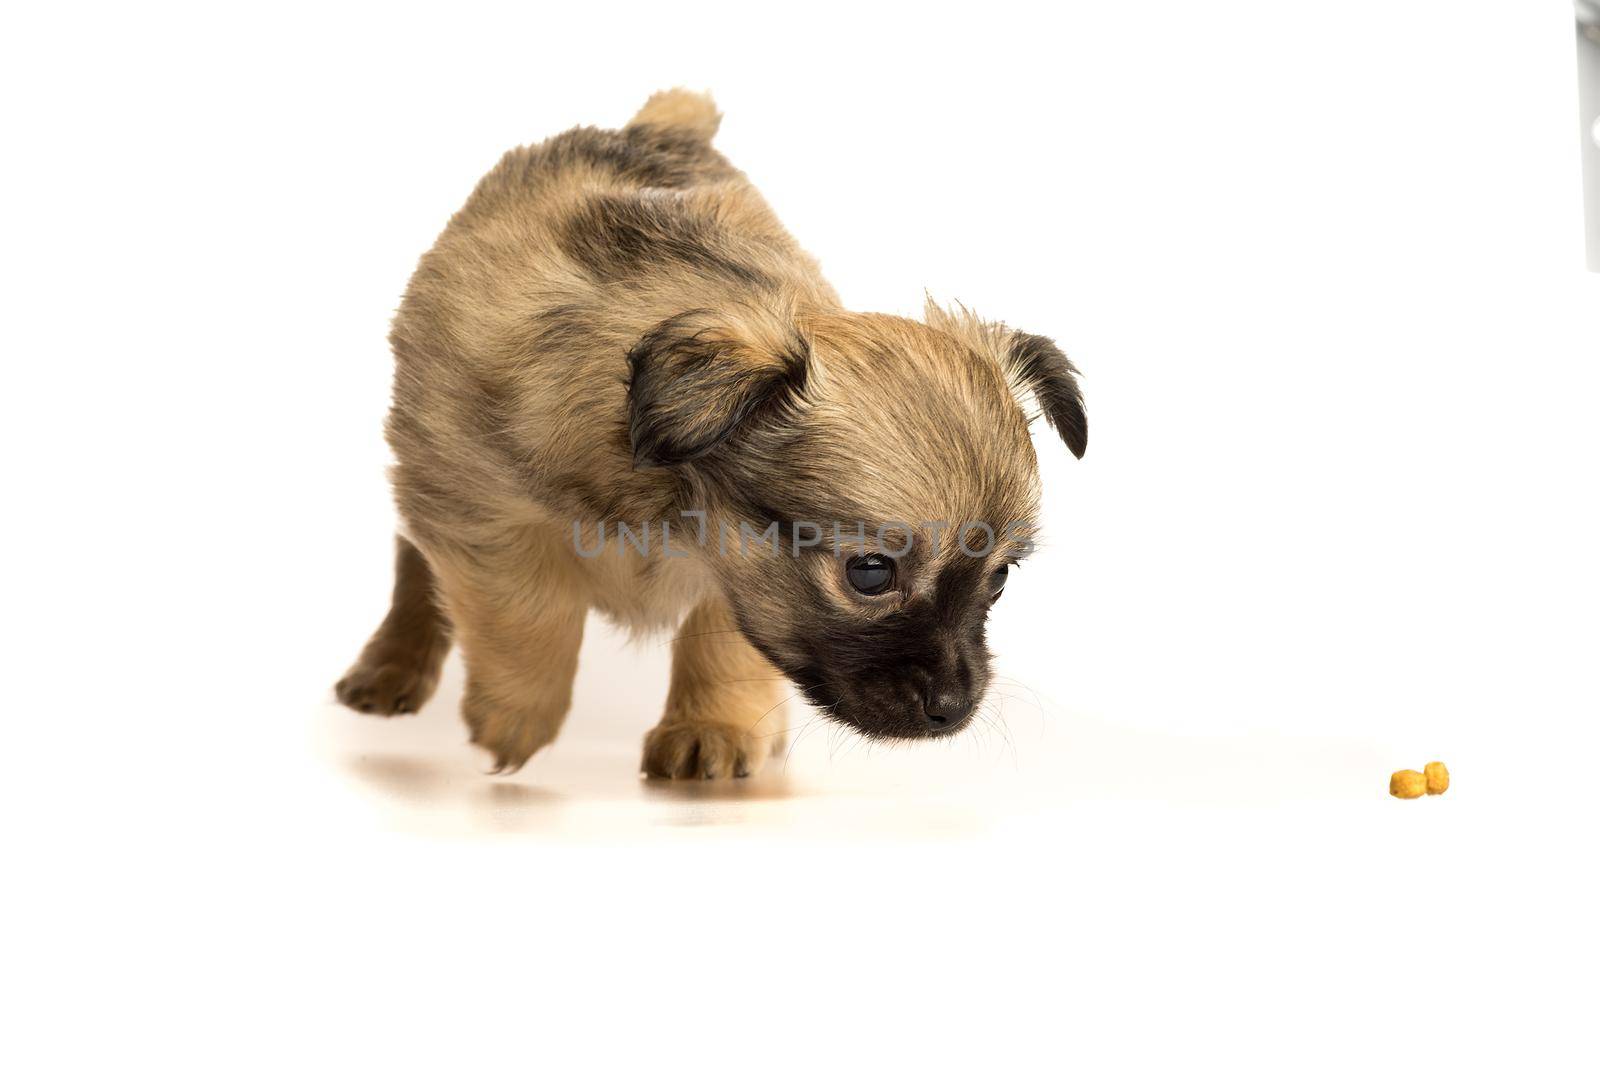 Cute little chihuahua puppy isolated in white background by LeoniekvanderVliet